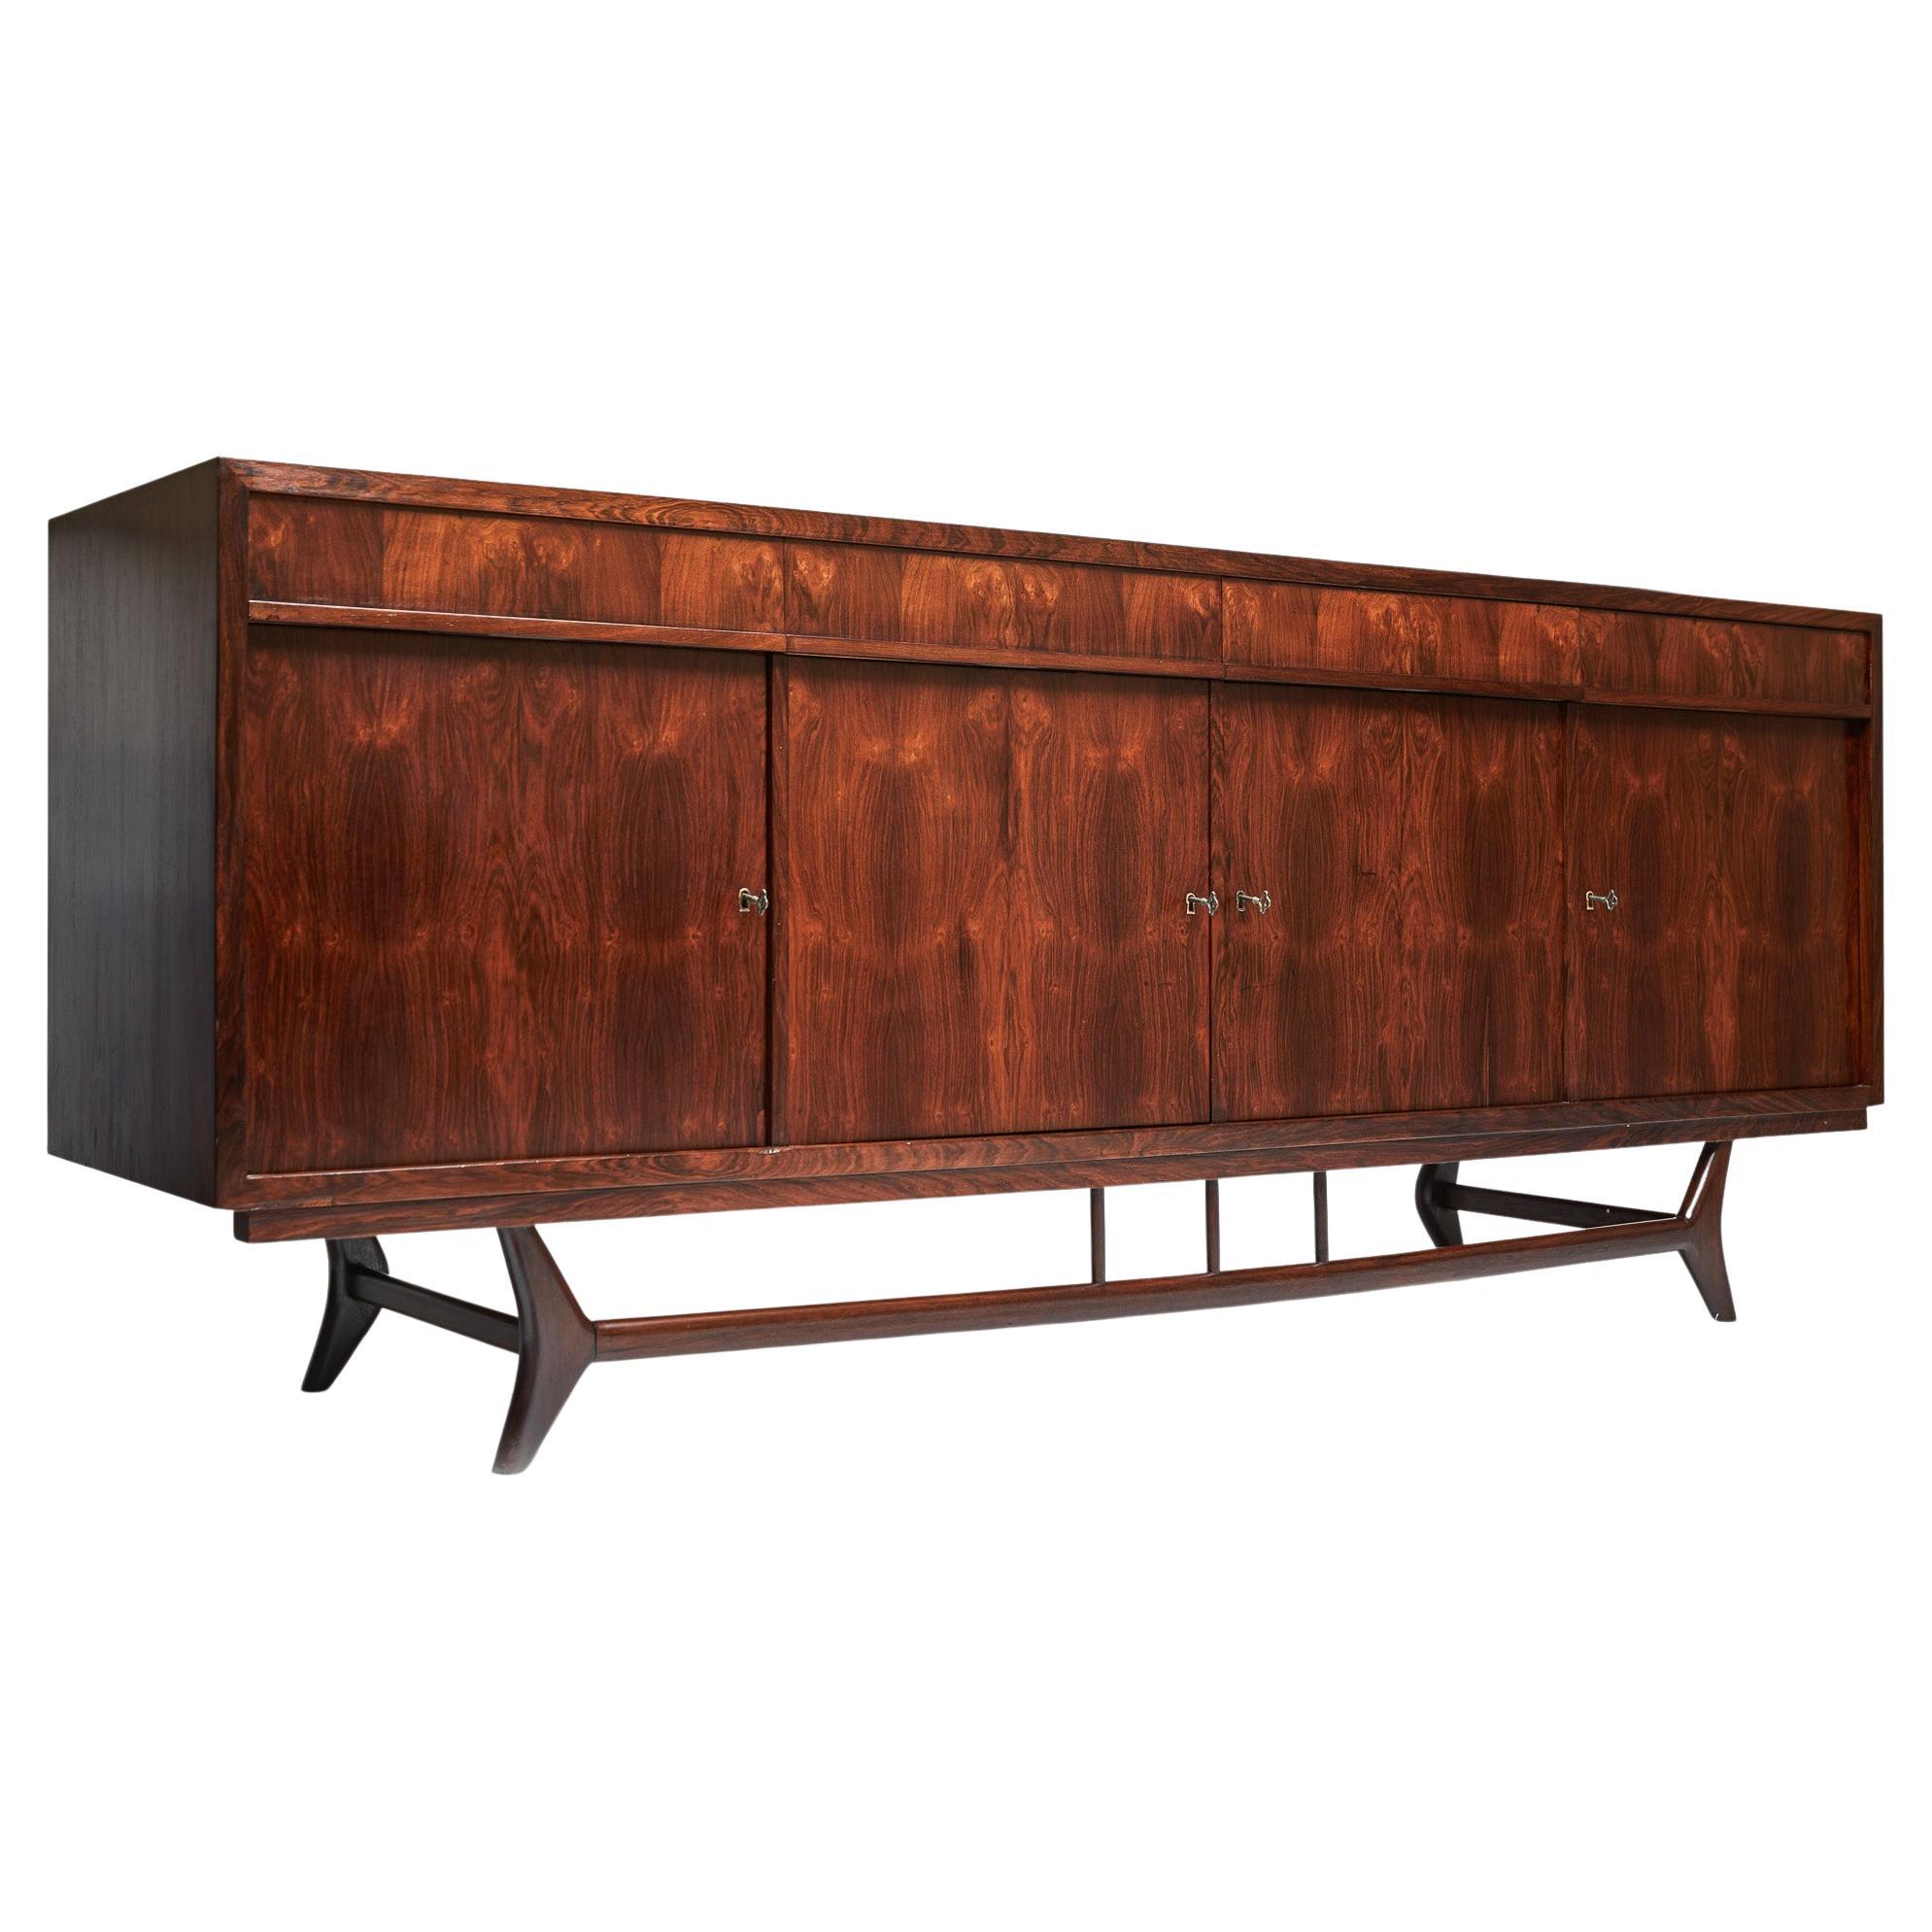 Available today, this Brazilian Modern Credenza in Hardwood and Brass finishes designed by Moveis Aparecida in sixties is exquisite!

This spectacular mid-century modern credenza is made of finest Brazilian rosewood, as known as Jacaranda and has 6